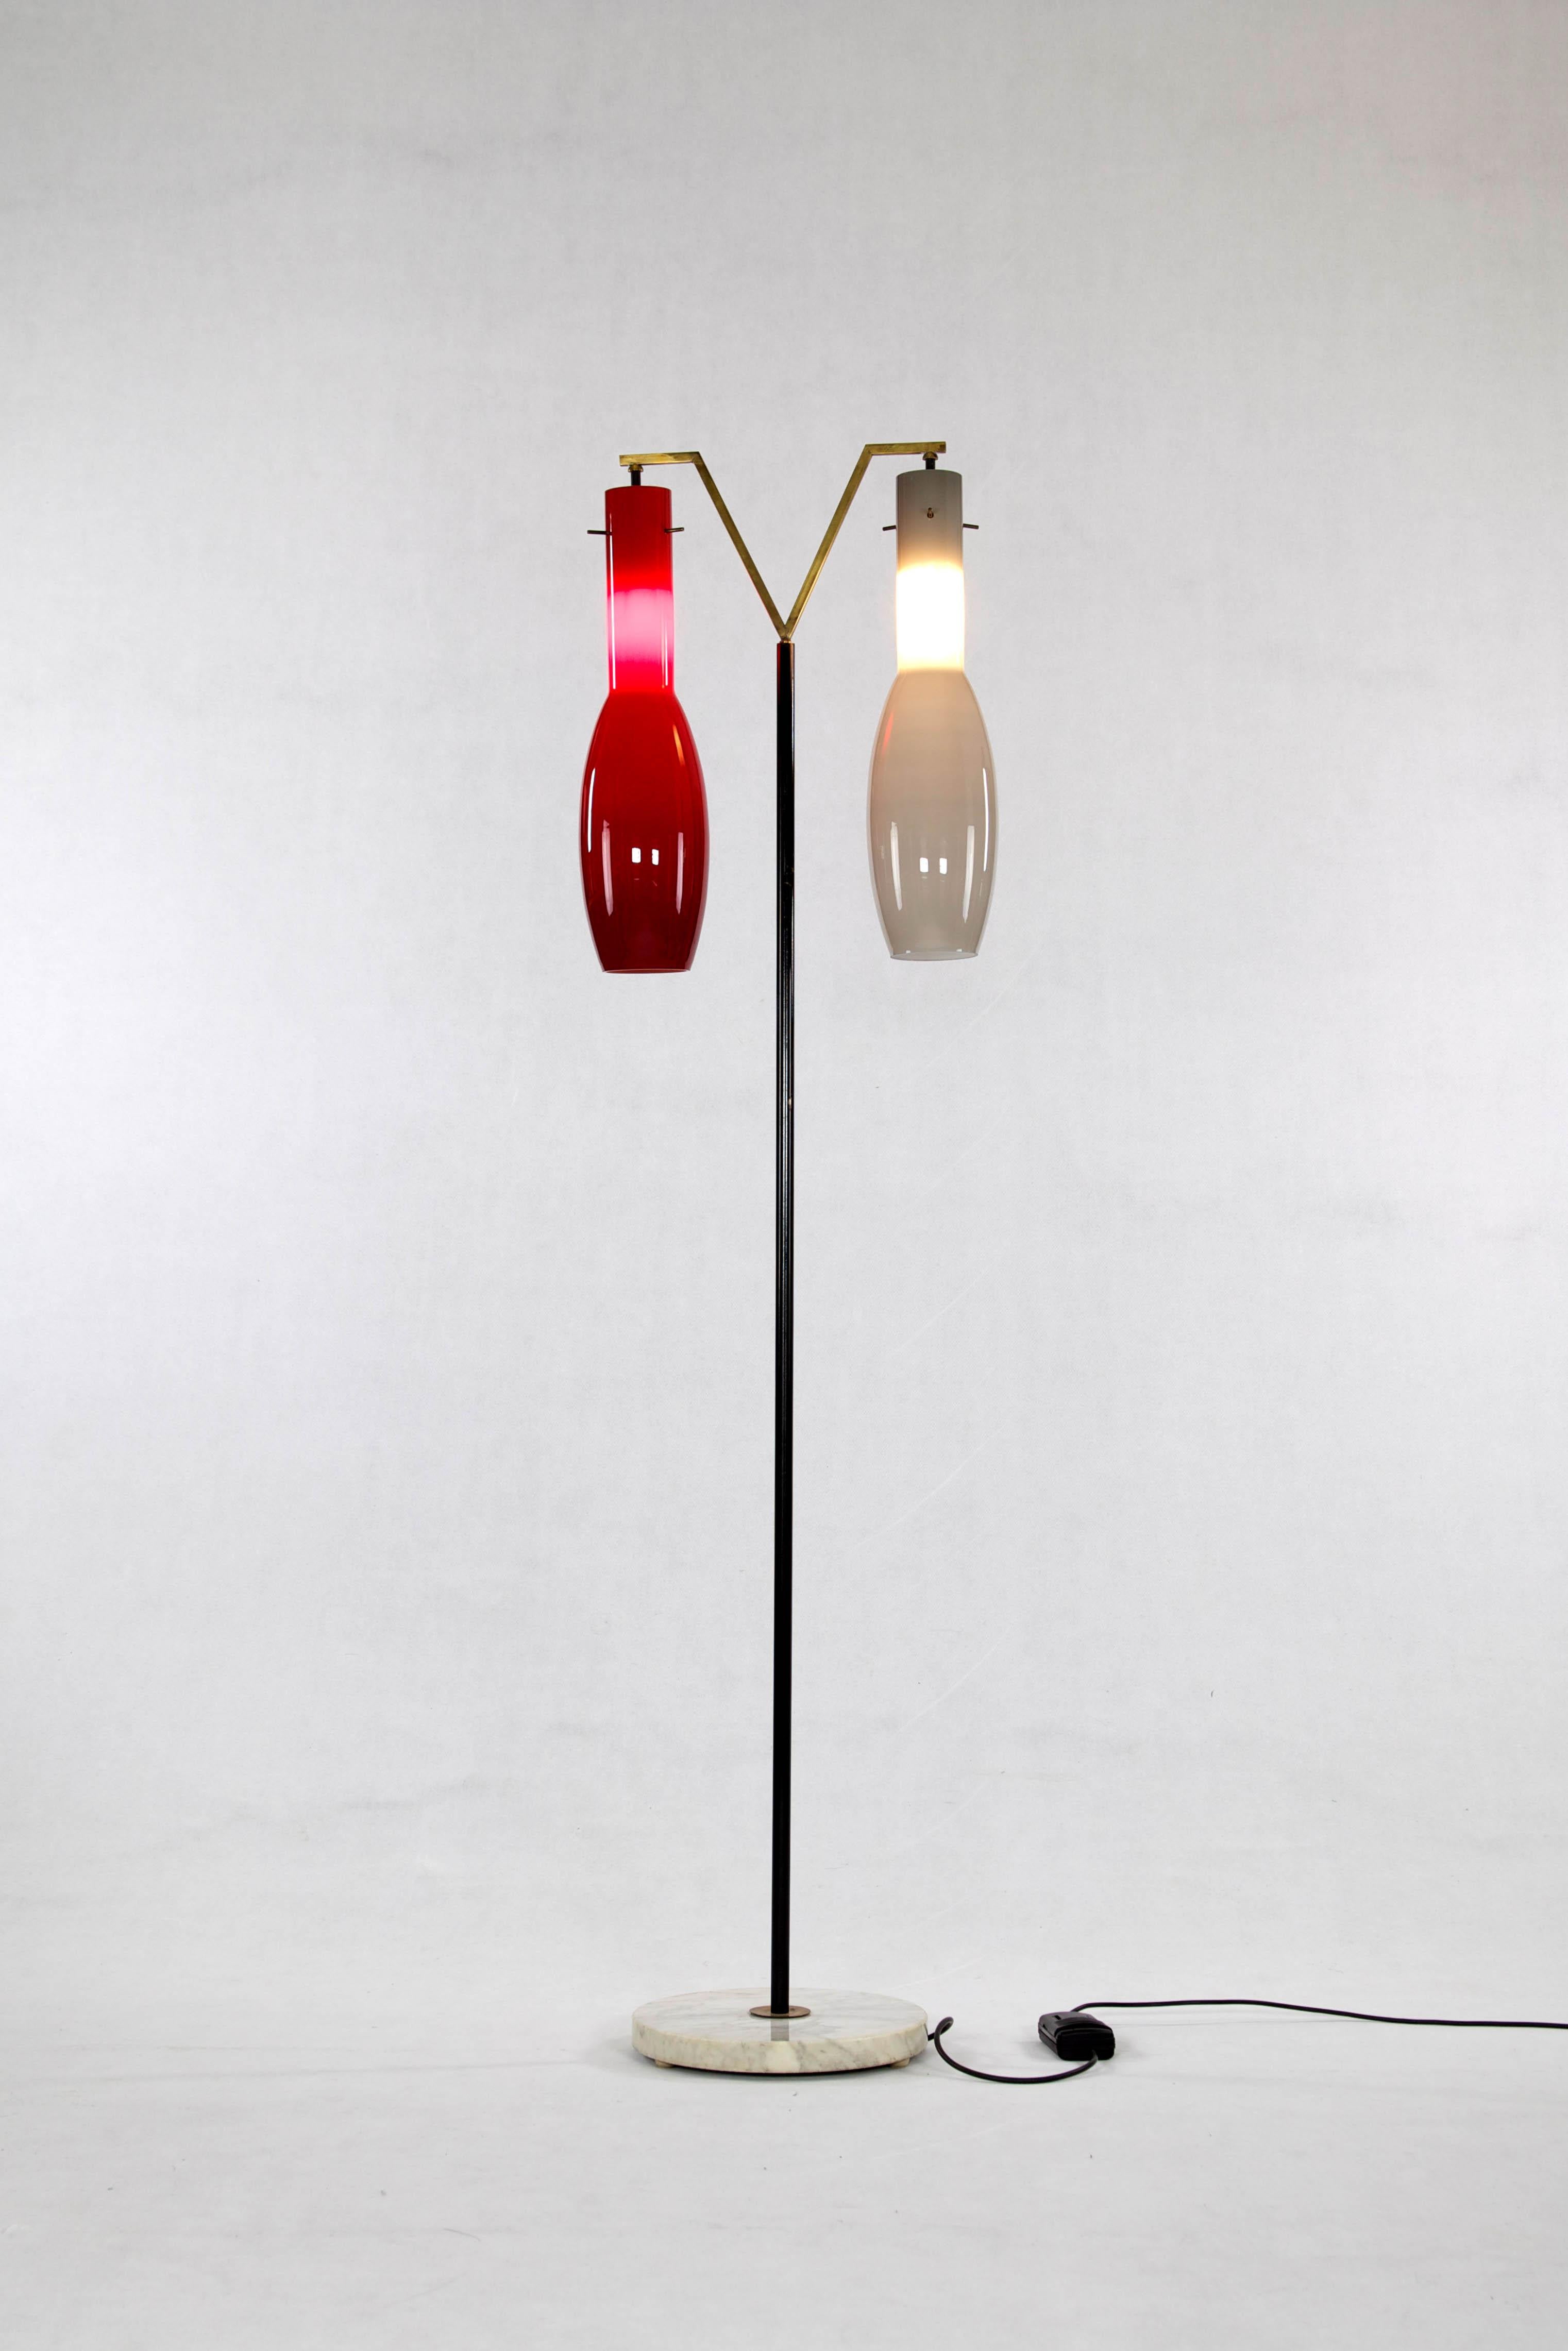 Floor lamp, Italy, 1950s. This lamp is built of two-tone glass shades, a marble base, lacquered iron bar and brass elements.
 
Feel free to contact us for more detailed pictures.